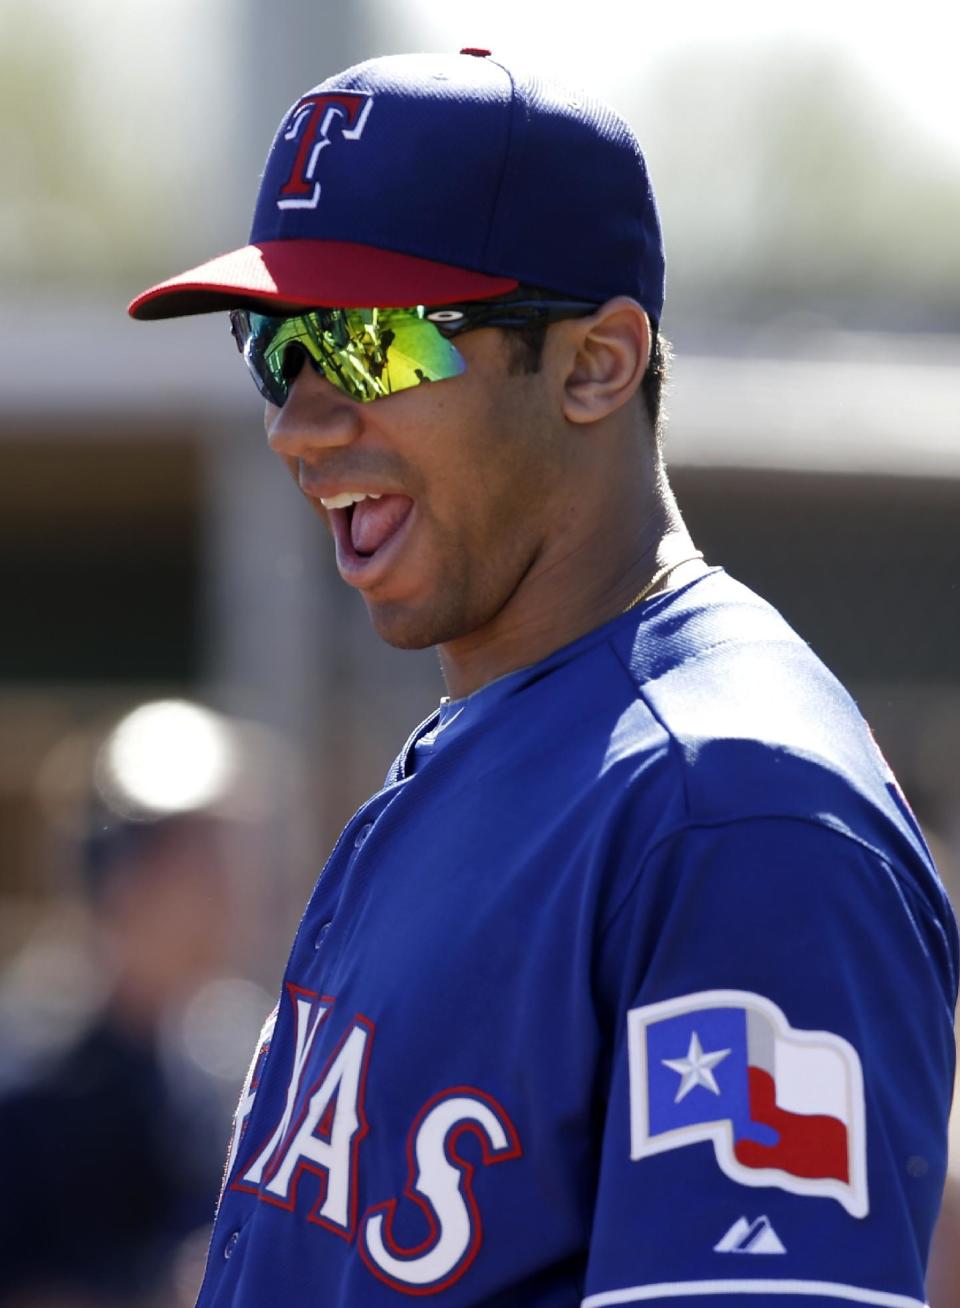 Seattle Seahawks quarterback Russell Wilson laughs as he watches Texas Rangers players take batting practice during spring training baseball, Monday, March 3, 2014, in Surprise, Ariz. (AP Photo/Tony Gutierrez)